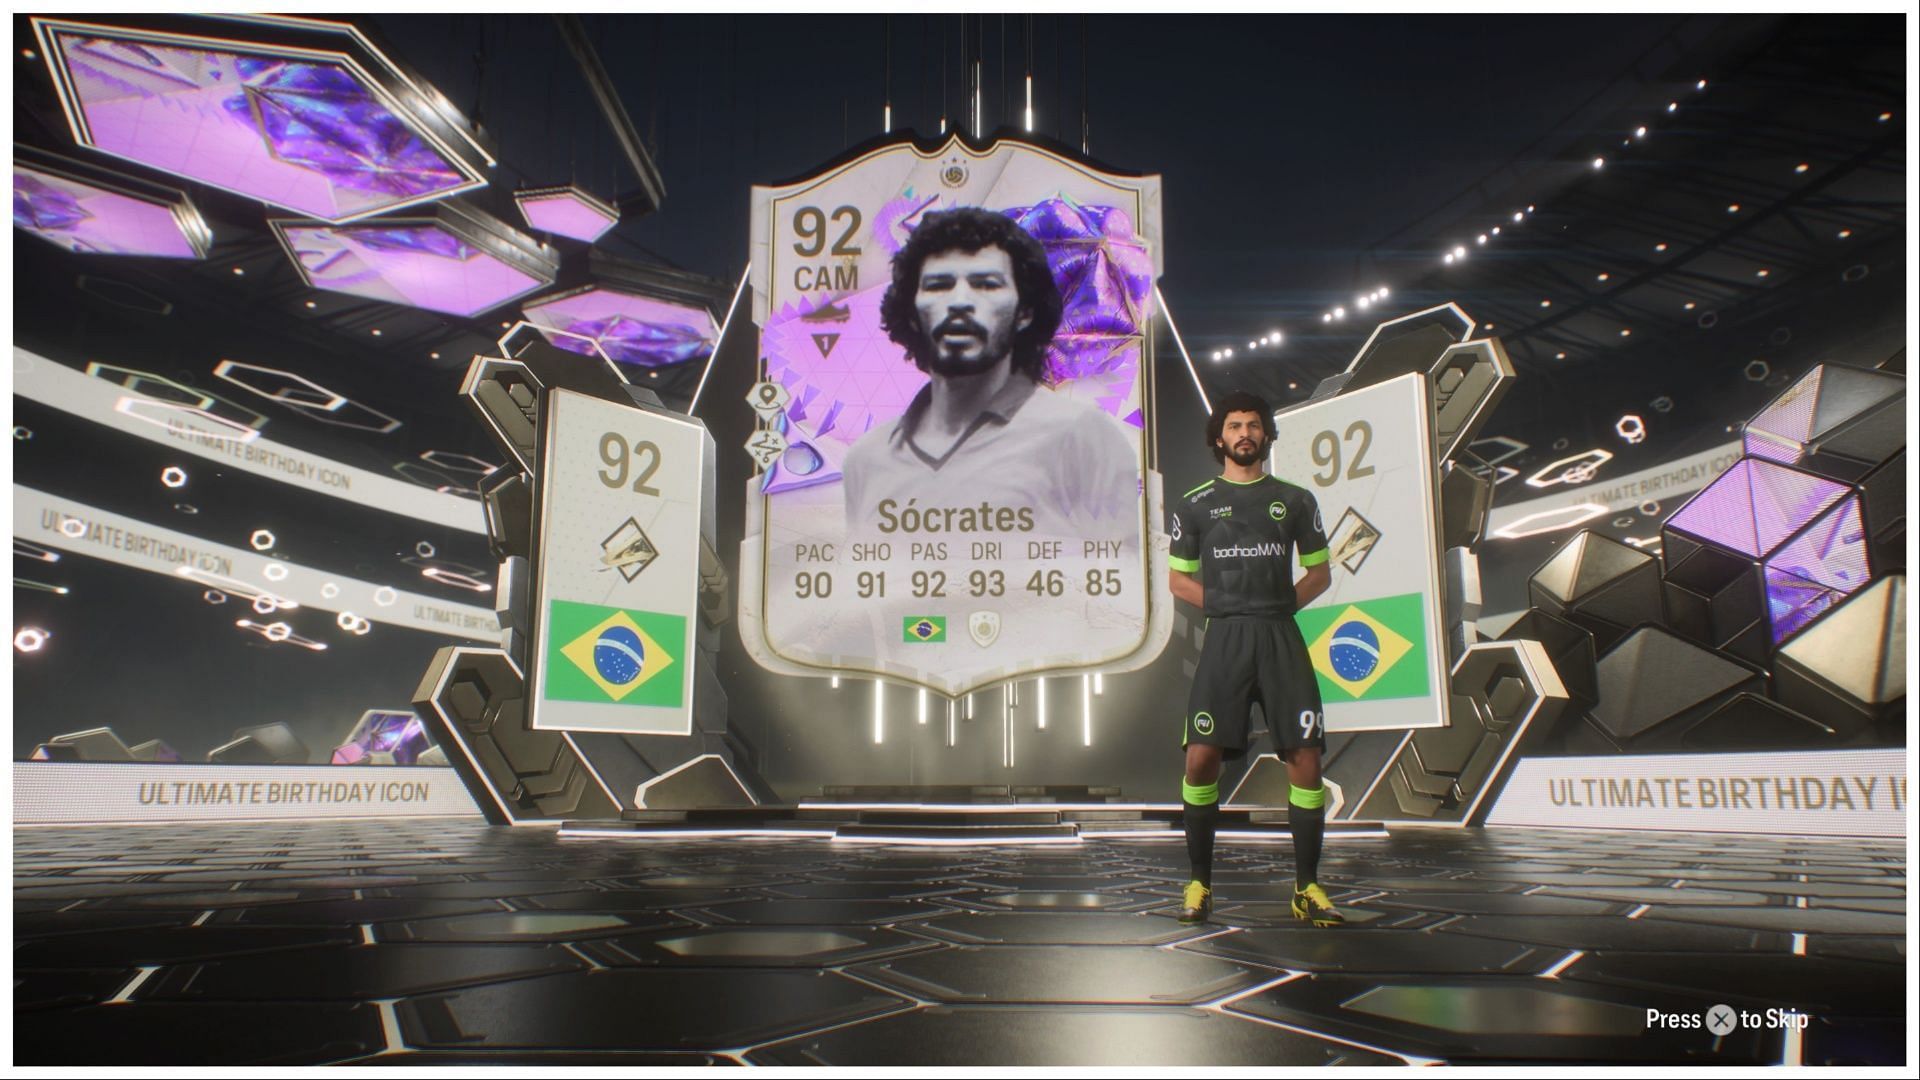 The EA FC 24 Socrates Ultimate Birthday Icon SBC is now live